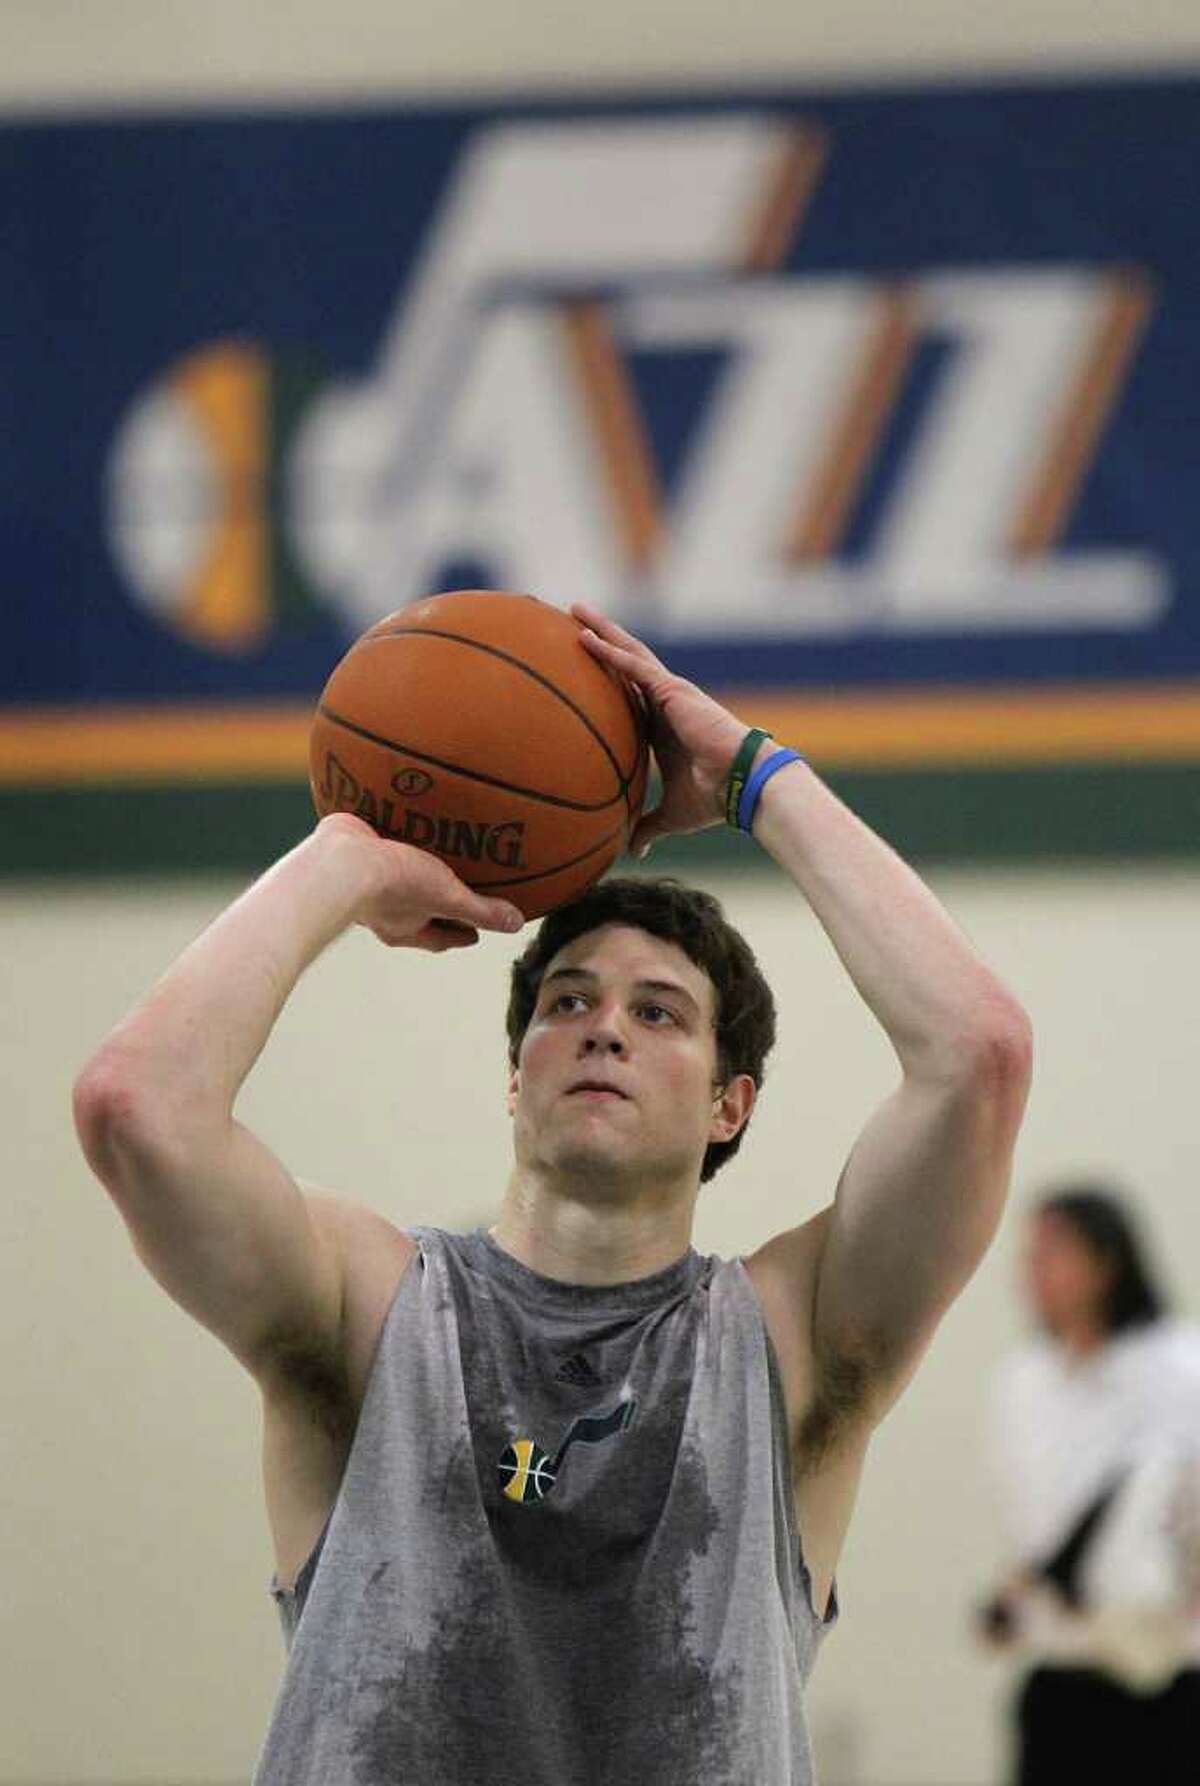 Jimmer Fredette's jersey helps him know he's arrived in NBA - Deseret News